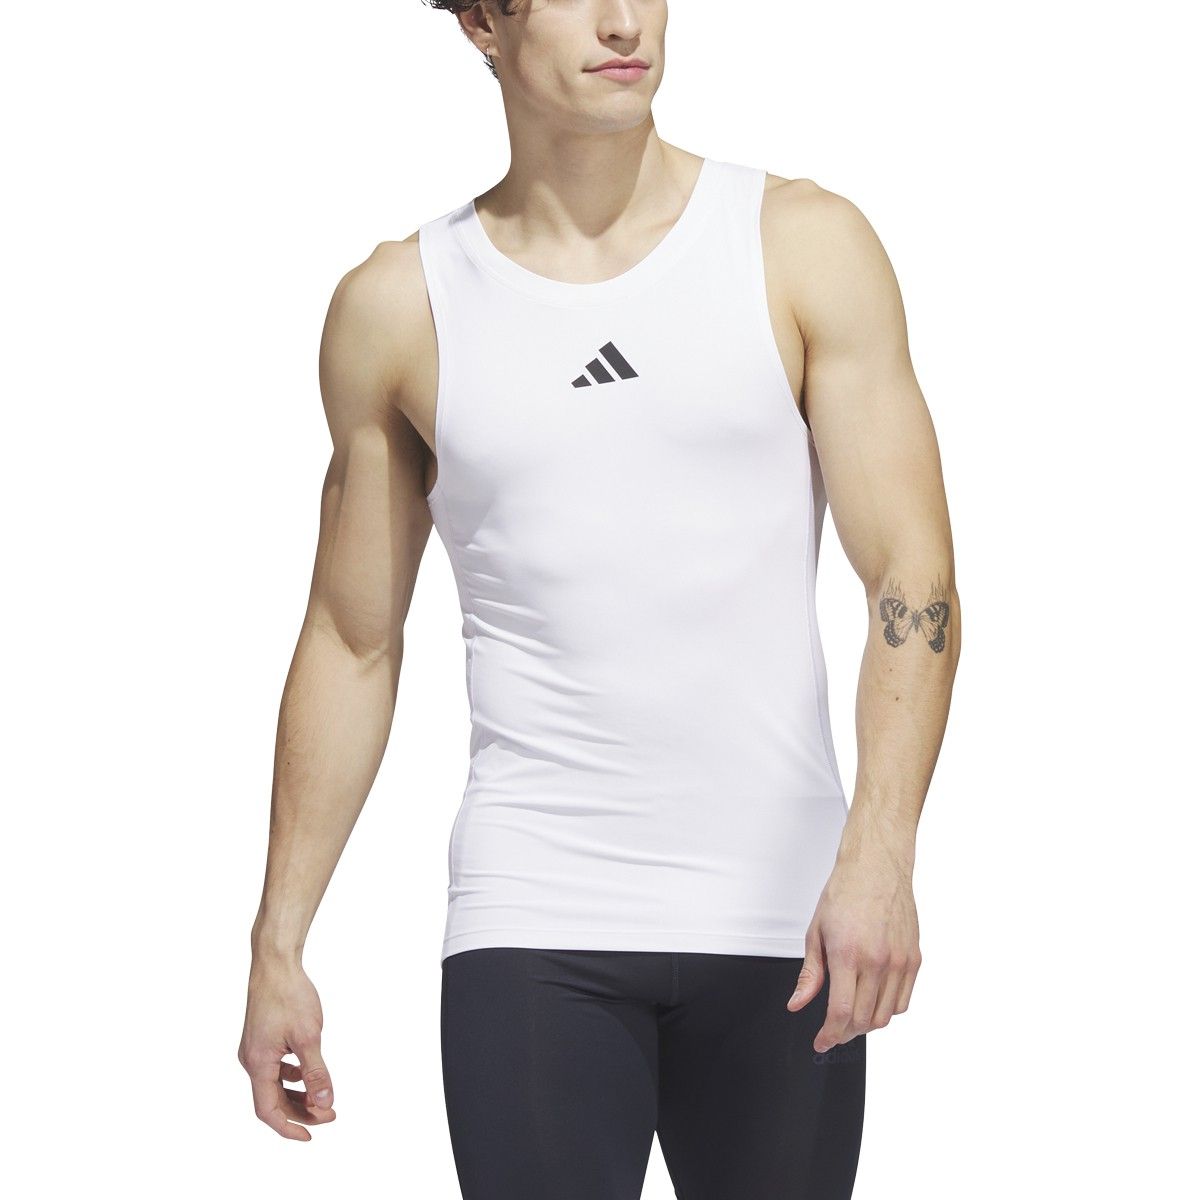 adidas Techfit Sleeveless Fitted Top - Mens Training